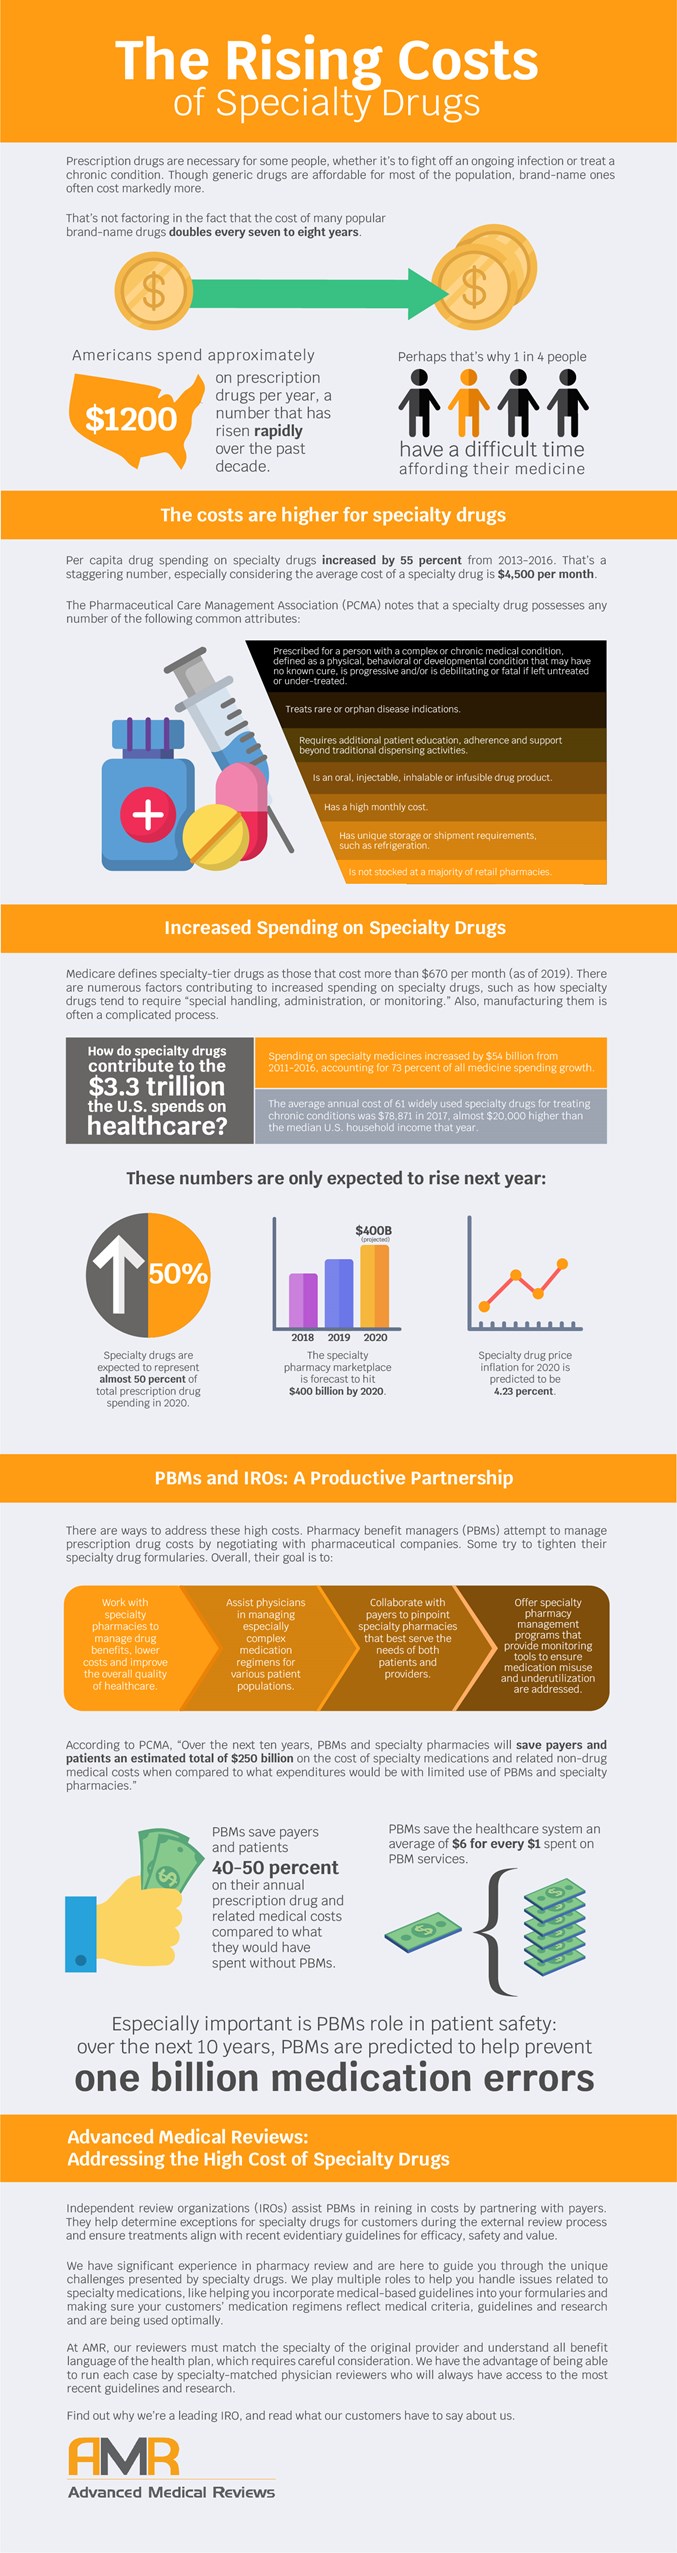 An infographic examining why there is an increase in cost for specialty drugs in the United States.